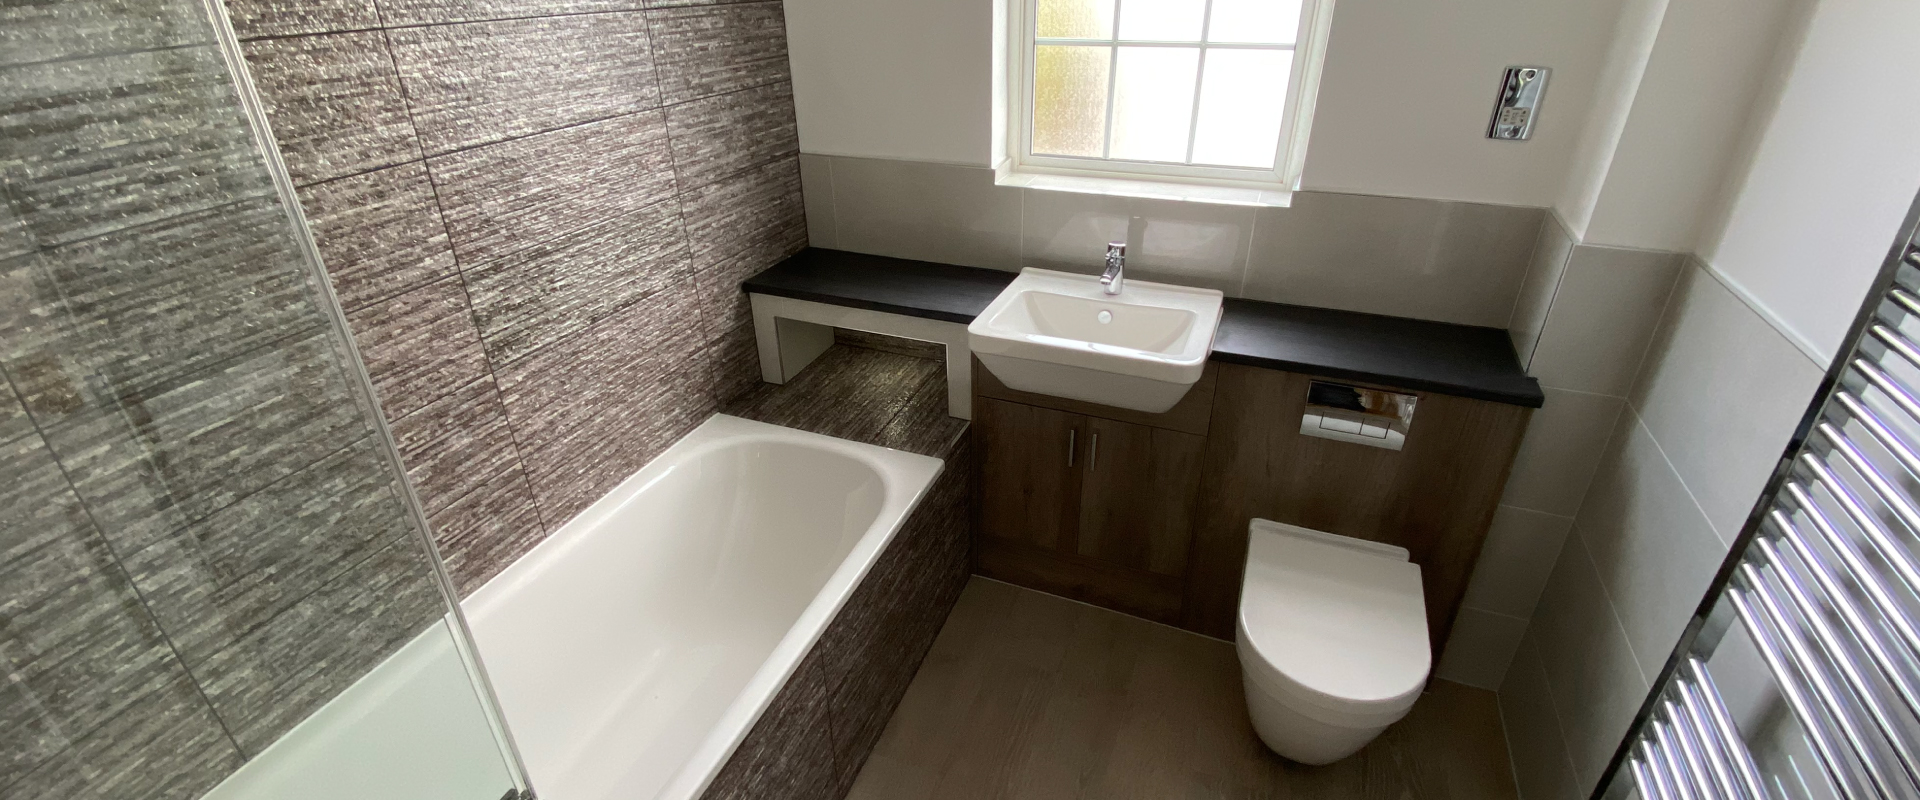 expert-bathroom-installers-in-high-wycombe